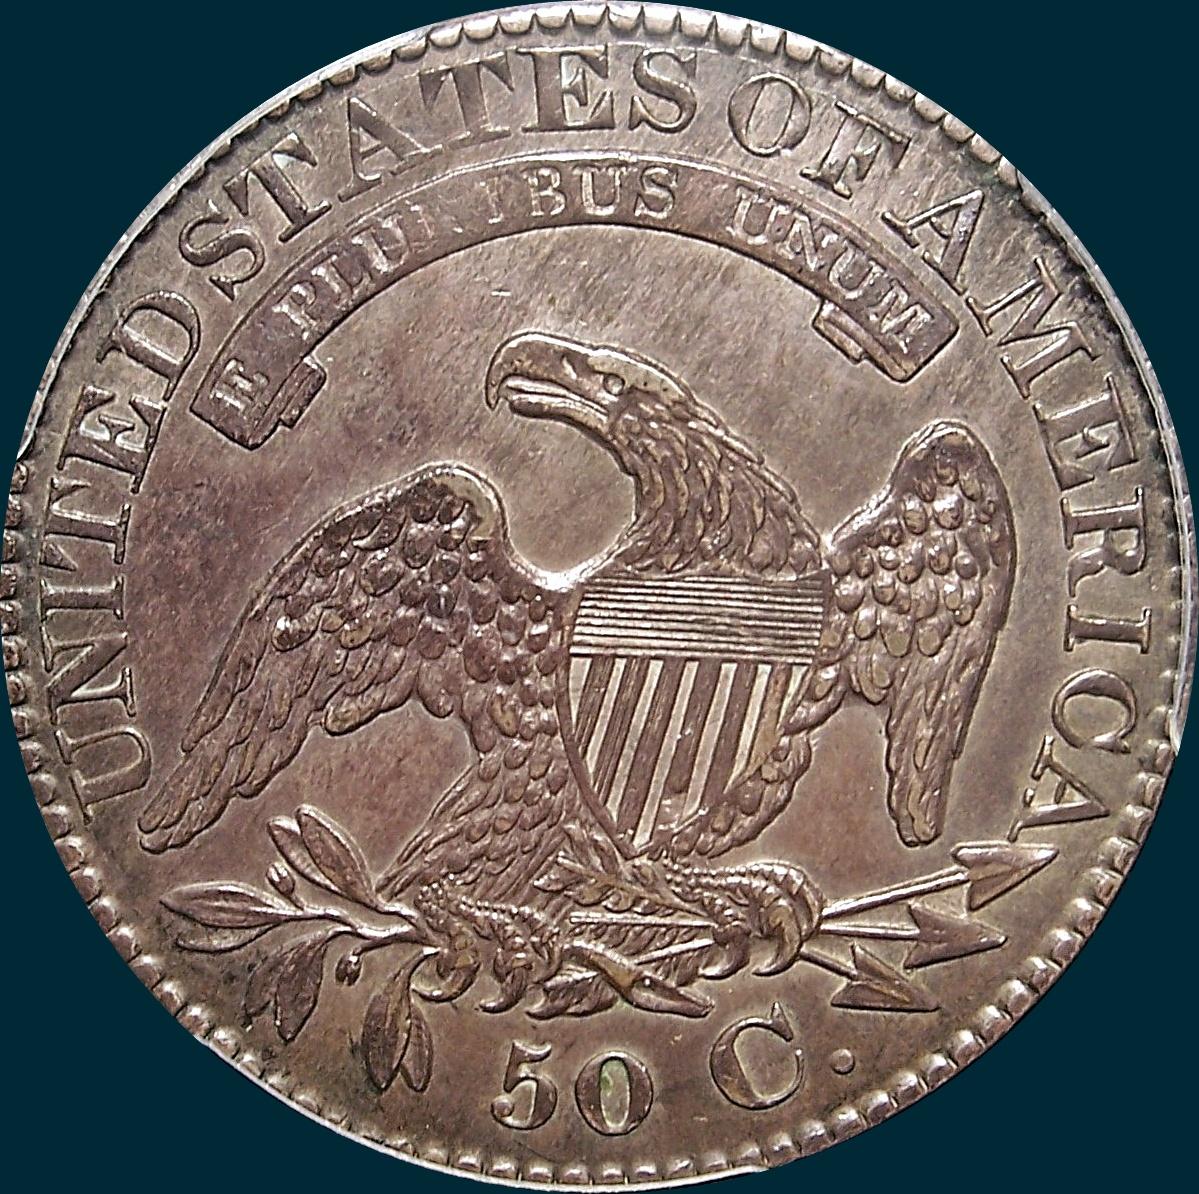 1828 O-109, square 2 large 8's,capped bust half dollar